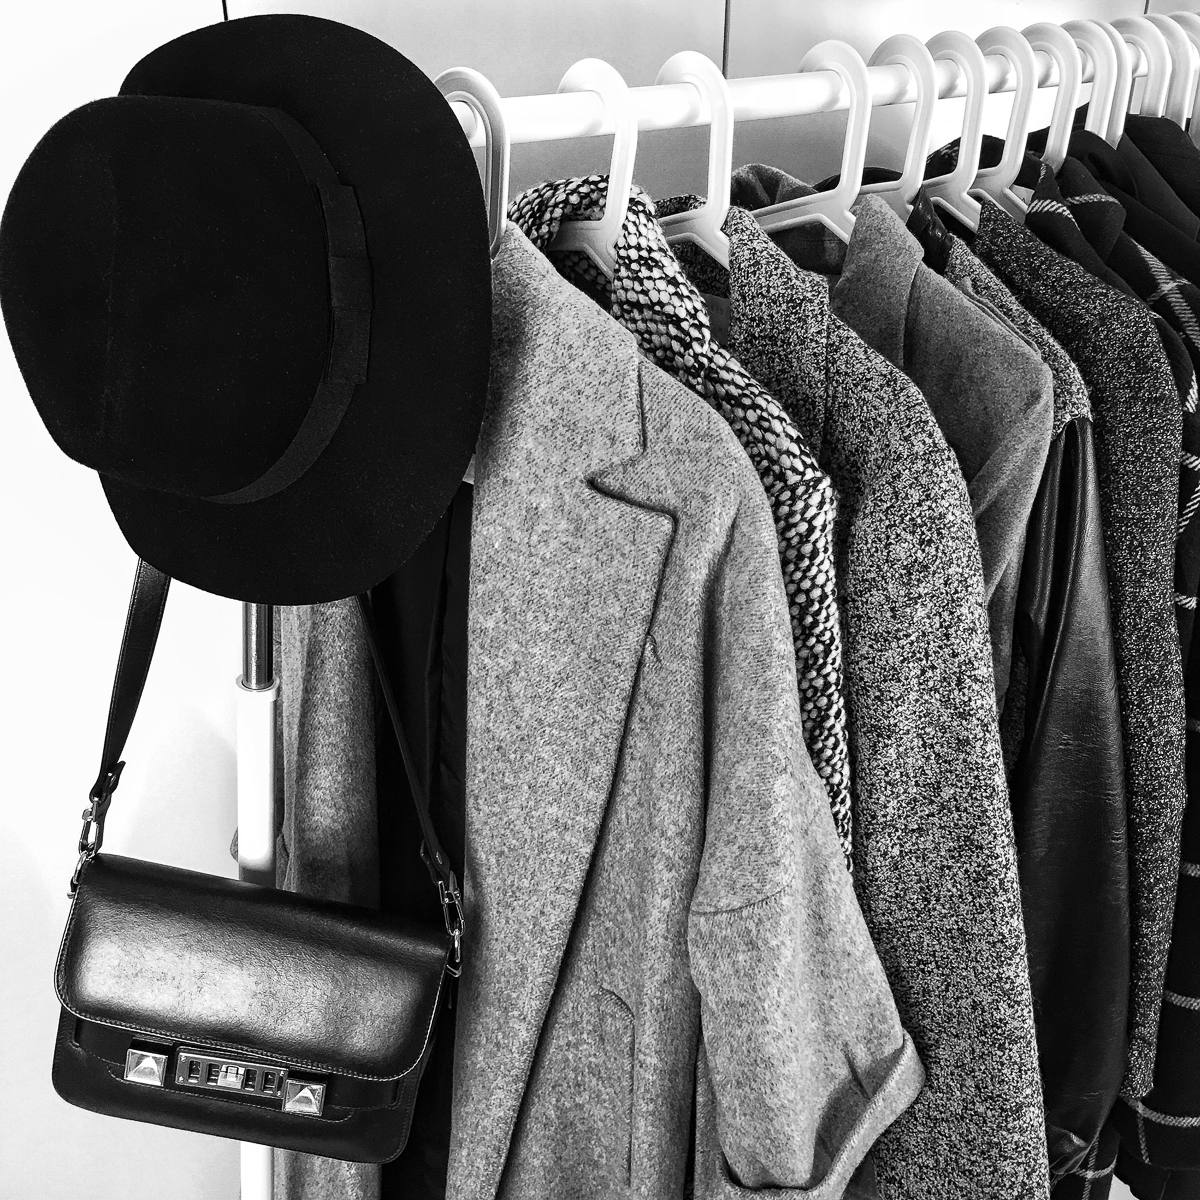 How to build a capsule wardrobe